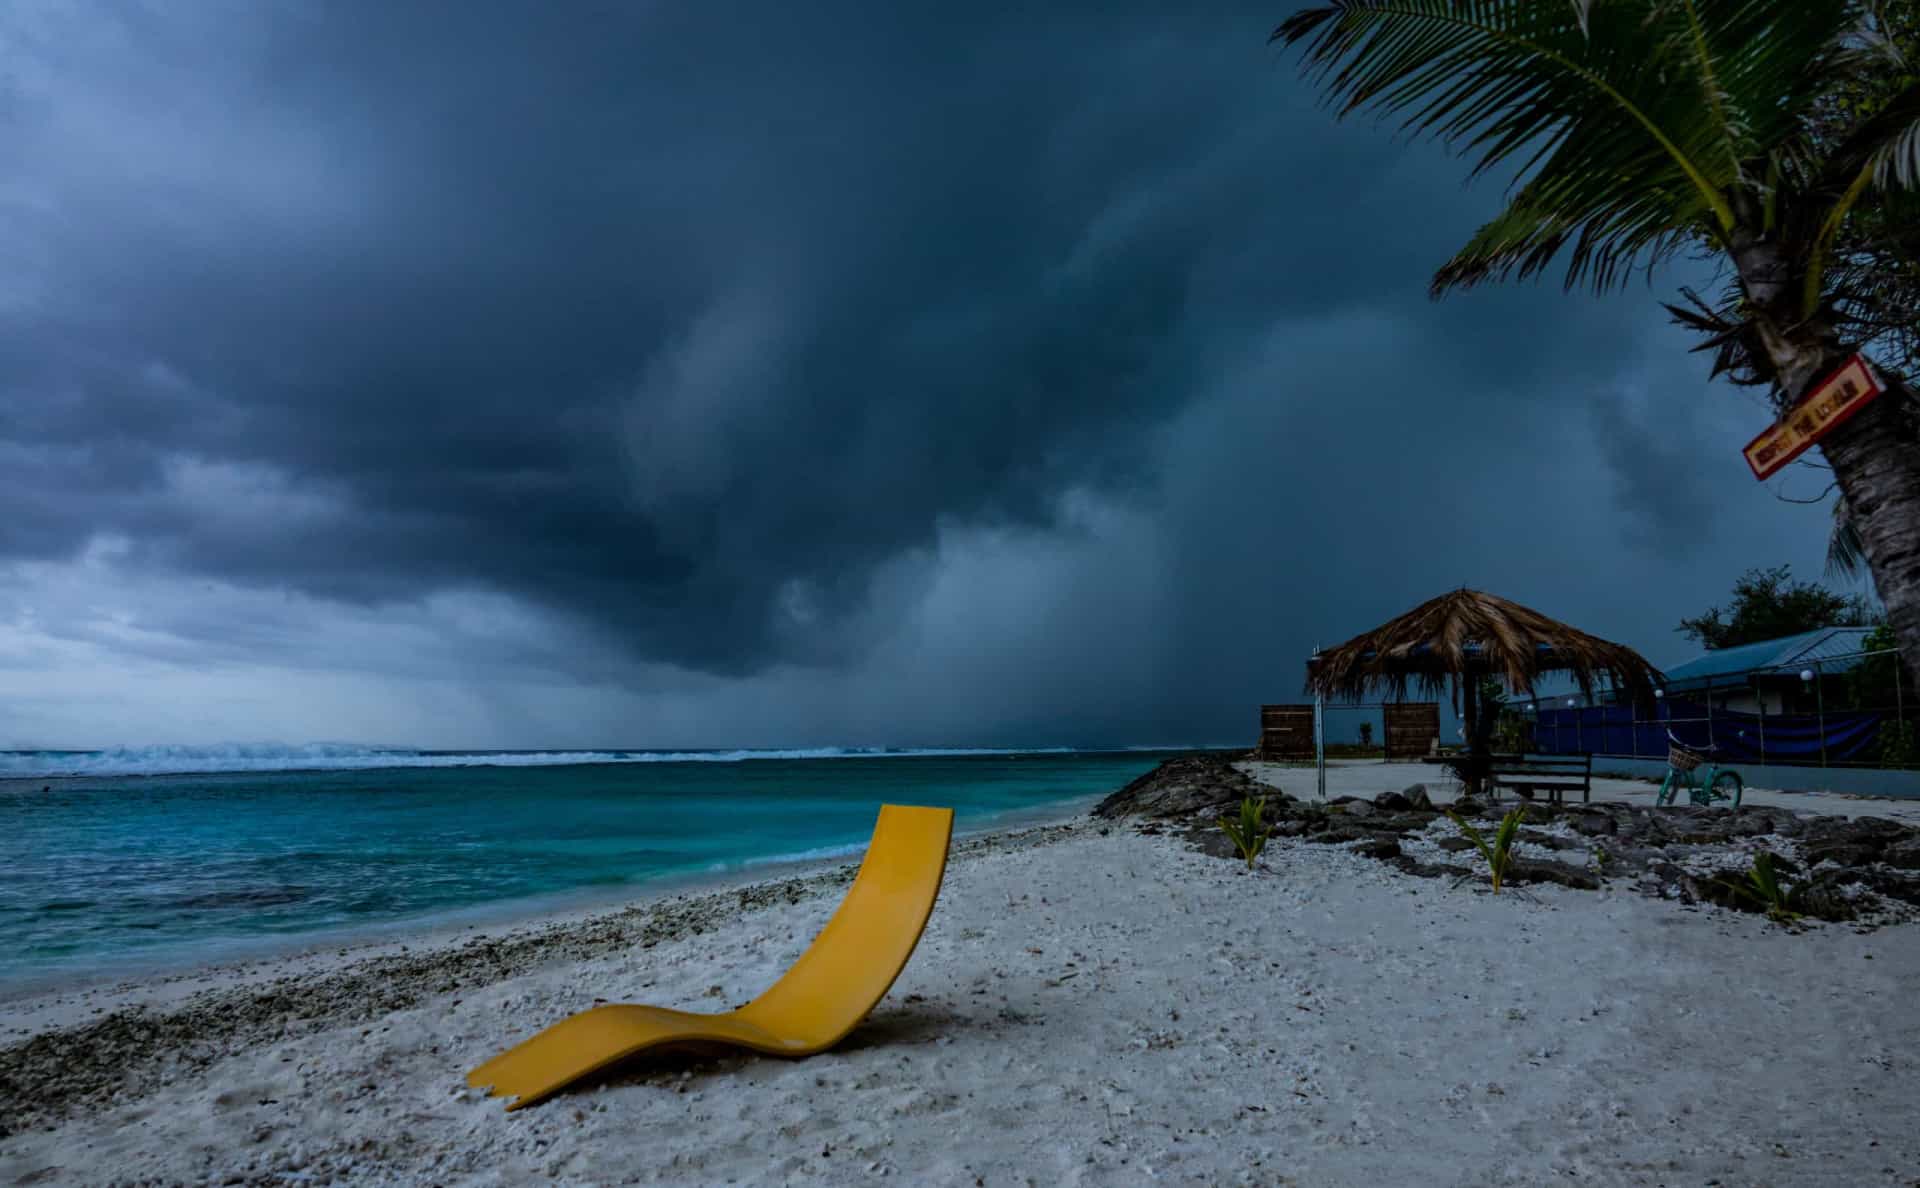 <p>It is rarely cold in the Maldives, but everyone gets a bit chilly if you're soaked to the bone. The wet season runs from May to October, when it is often cloudy with large downpours. Going in the dry season is highly recommended.</p>